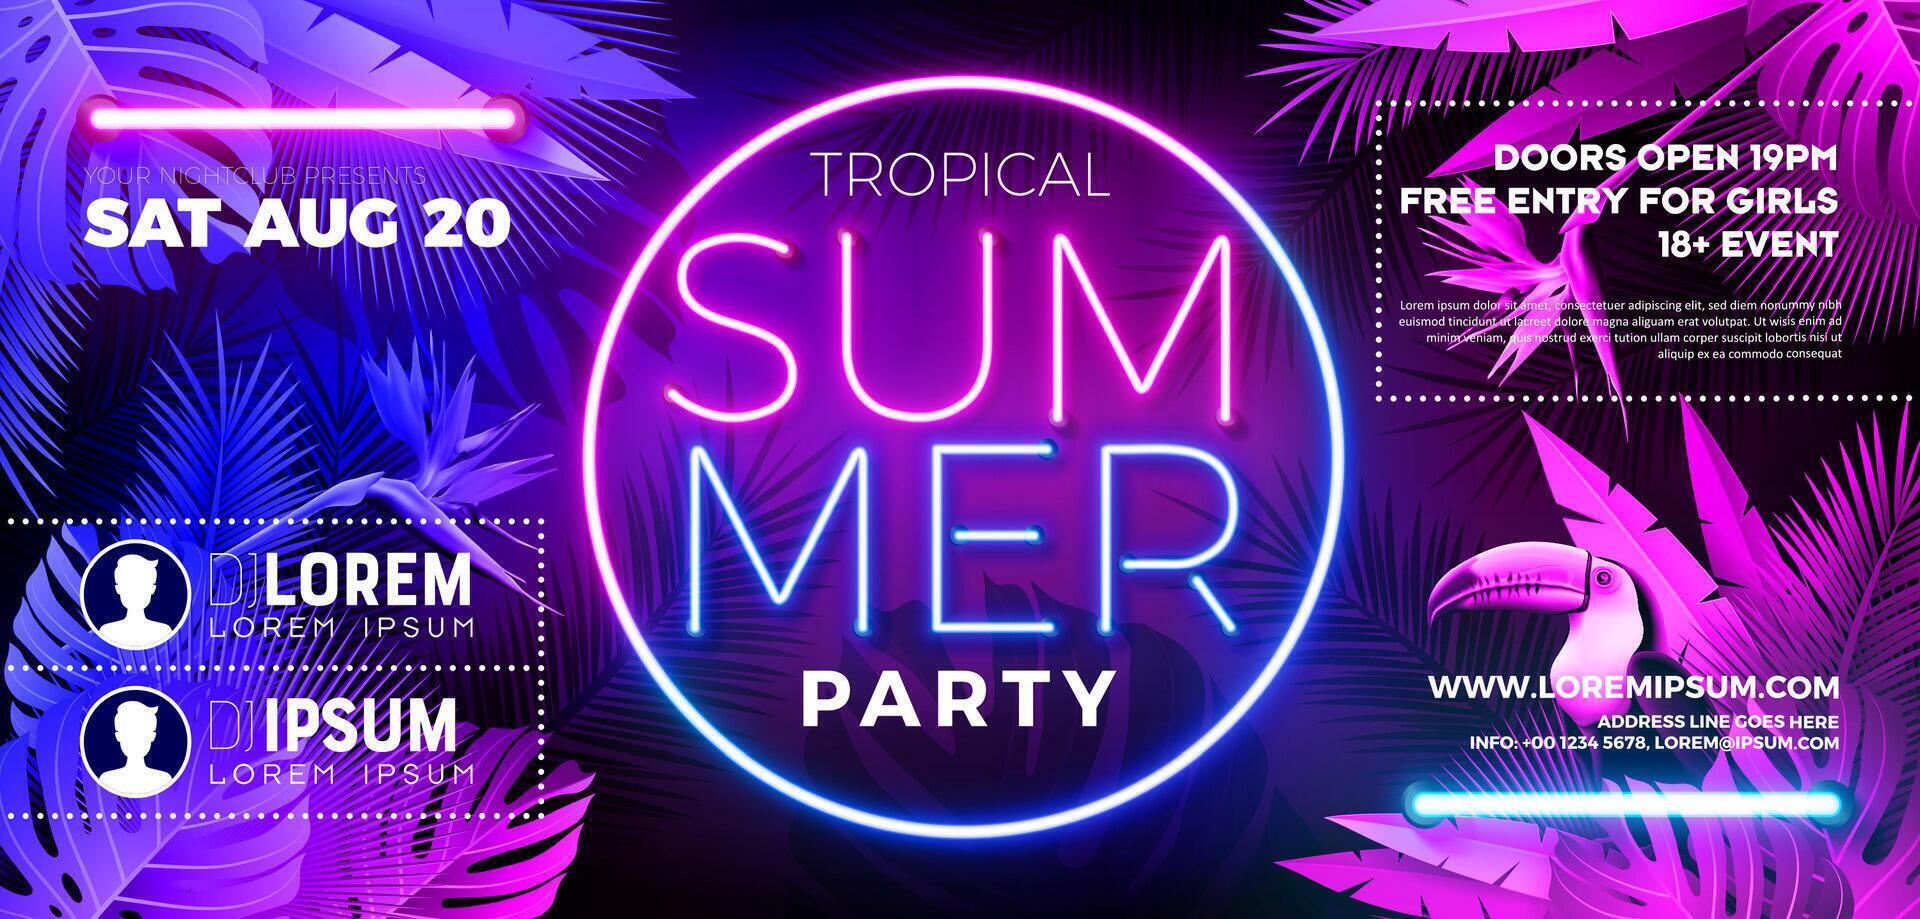 Summer Party Banner Design Template with Glowing Neon Light on Fluorescent Tropic Leaves Background. Summer Celebration Holiday Illustration for Banner, Flyer, Invitation or Celebration Poster. vector